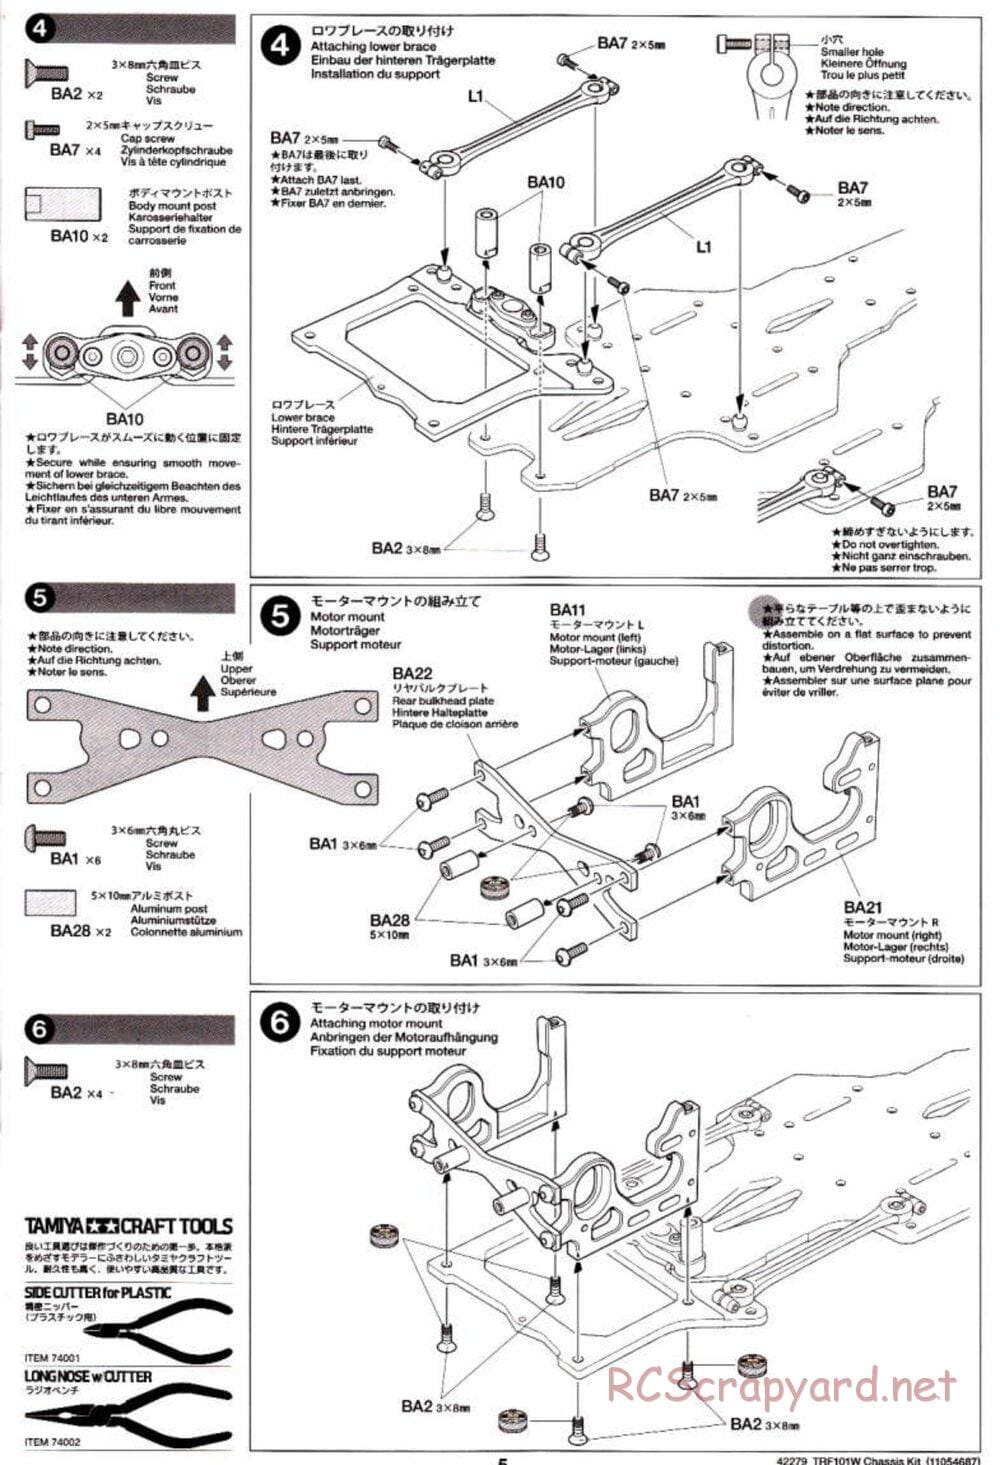 Tamiya - TRF101W Chassis Chassis - Manual - Page 5